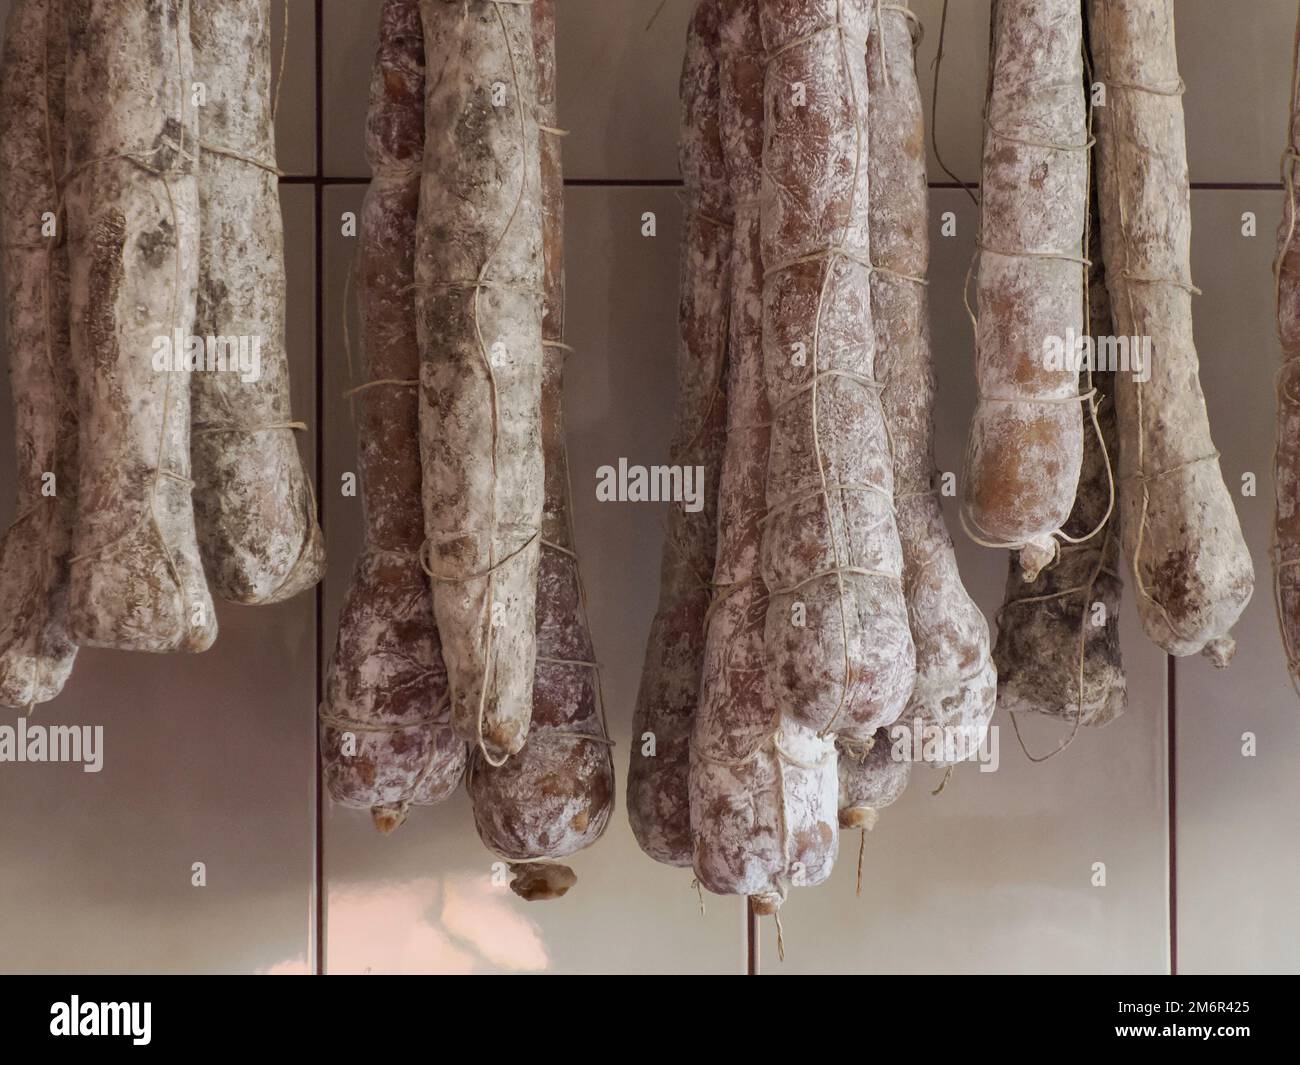 at - and 28 the Alamy market - photography hi-res stock Salami images Page